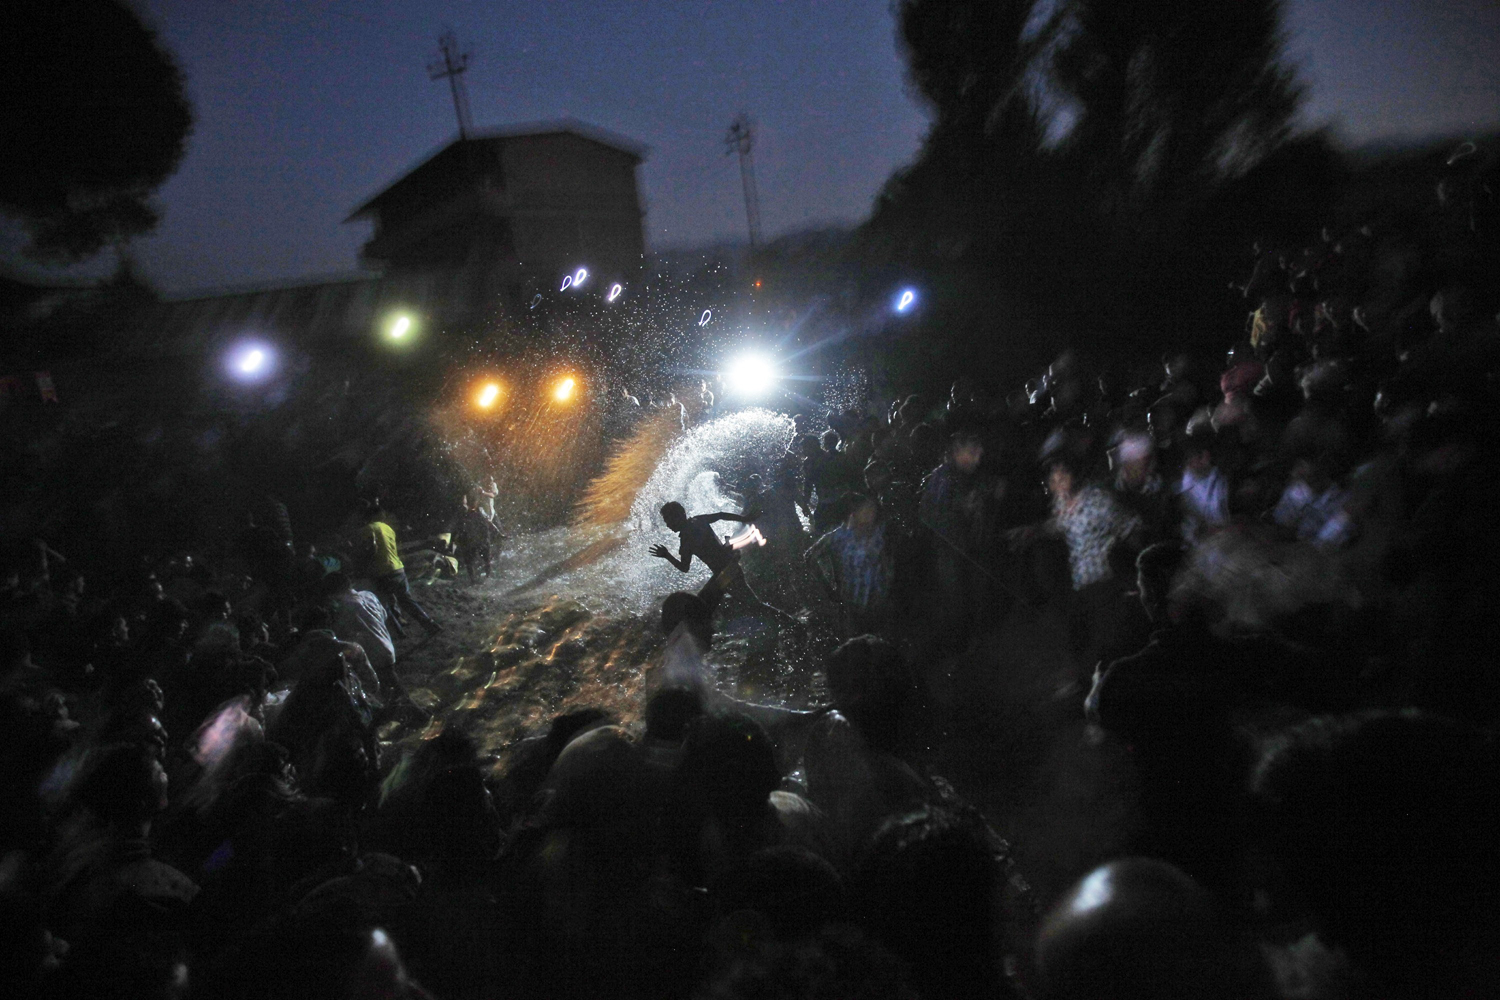 Image: Oct. 23, 2012. Nepalese devotees splash water on a water buffalo, unseen, as part of a ritual before sacrificing it, during the ninth day of the Dashain festival in Katmandu.